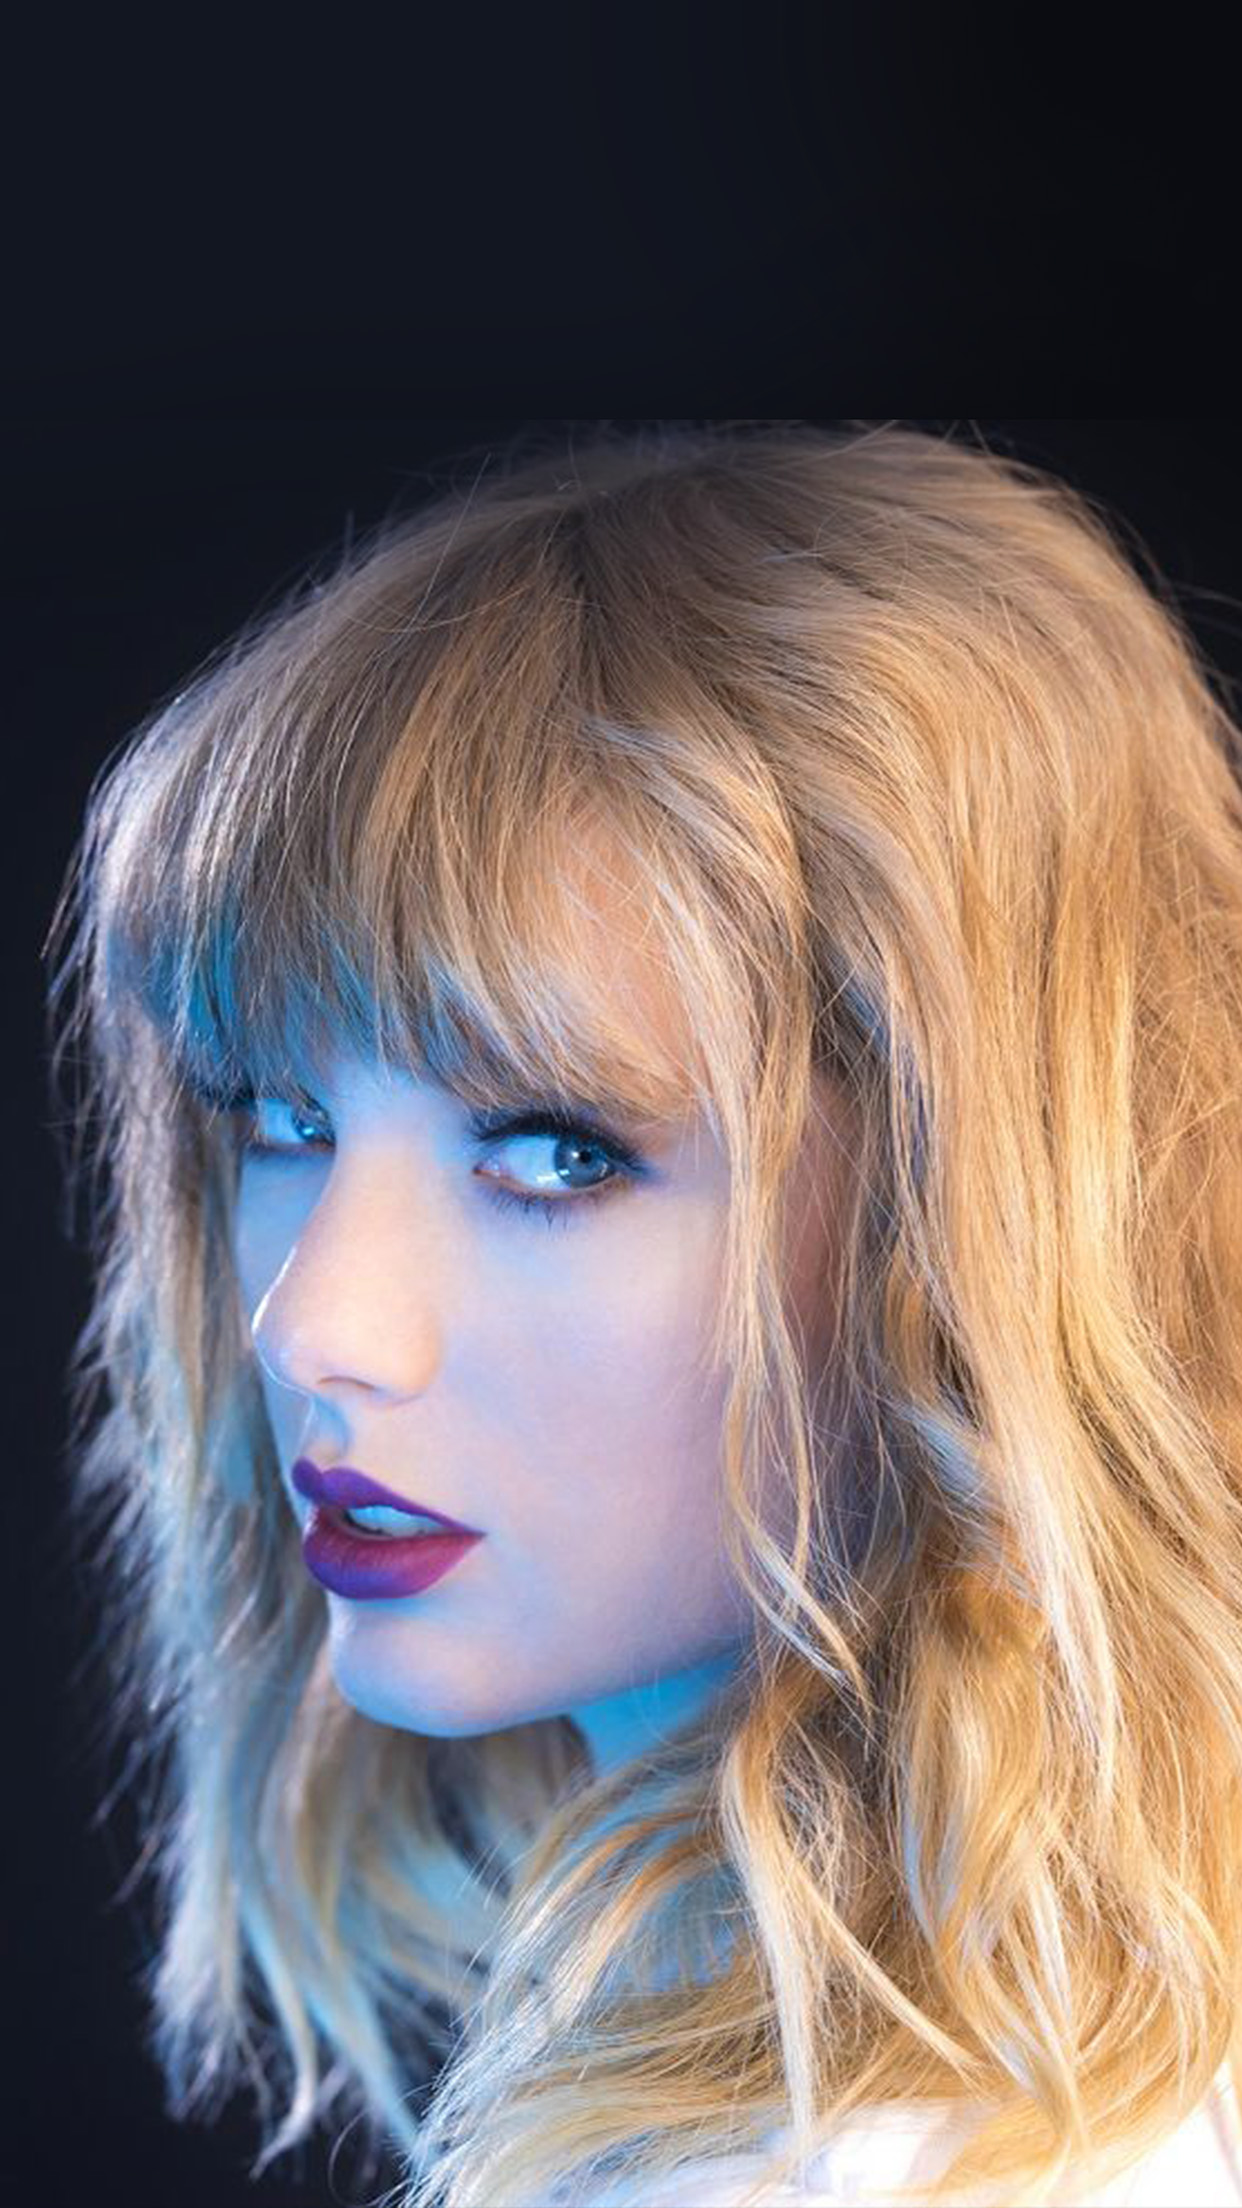 taylor swift iphone wallpaper,hair,face,blond,hairstyle,chin